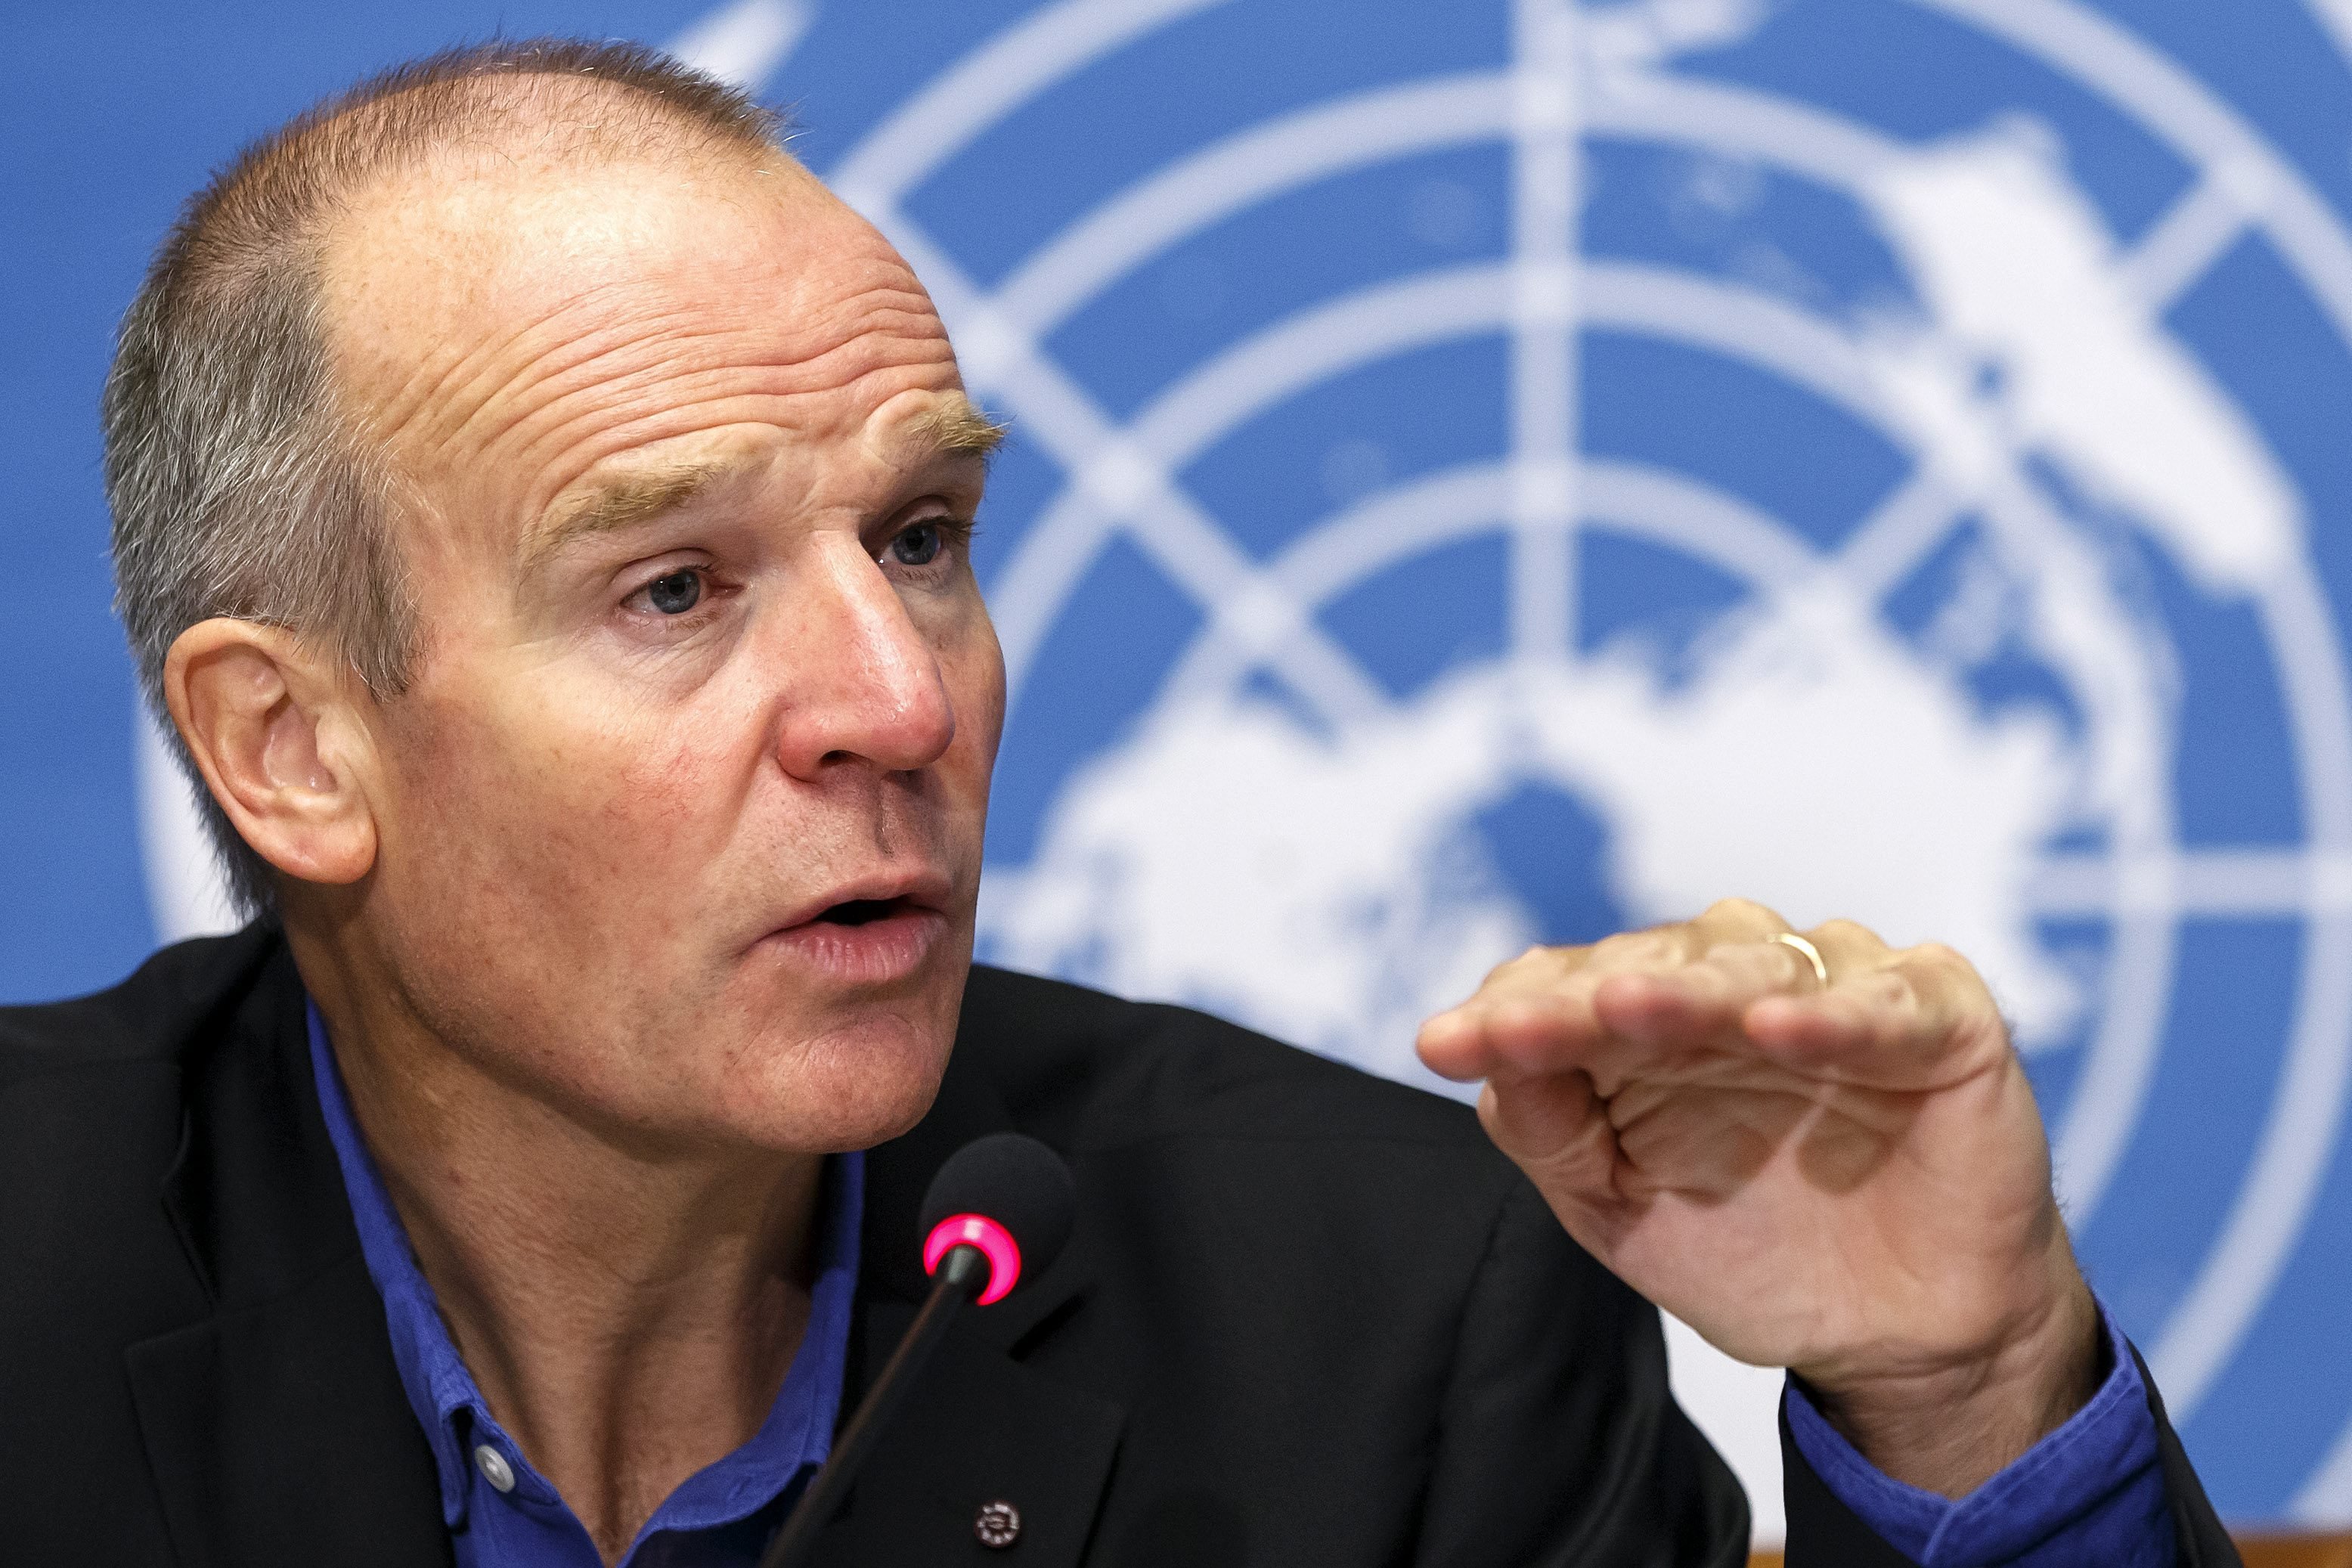 Christopher Dye, Director of Strategy of the World Health Organization speaks to the media about Ebola Virus Disease in West Africa, during a press conference, at the European headquarters of the United Nations in Geneva on Sept. 22, 2-14. (Salvatore Di Nolfi—EPA)